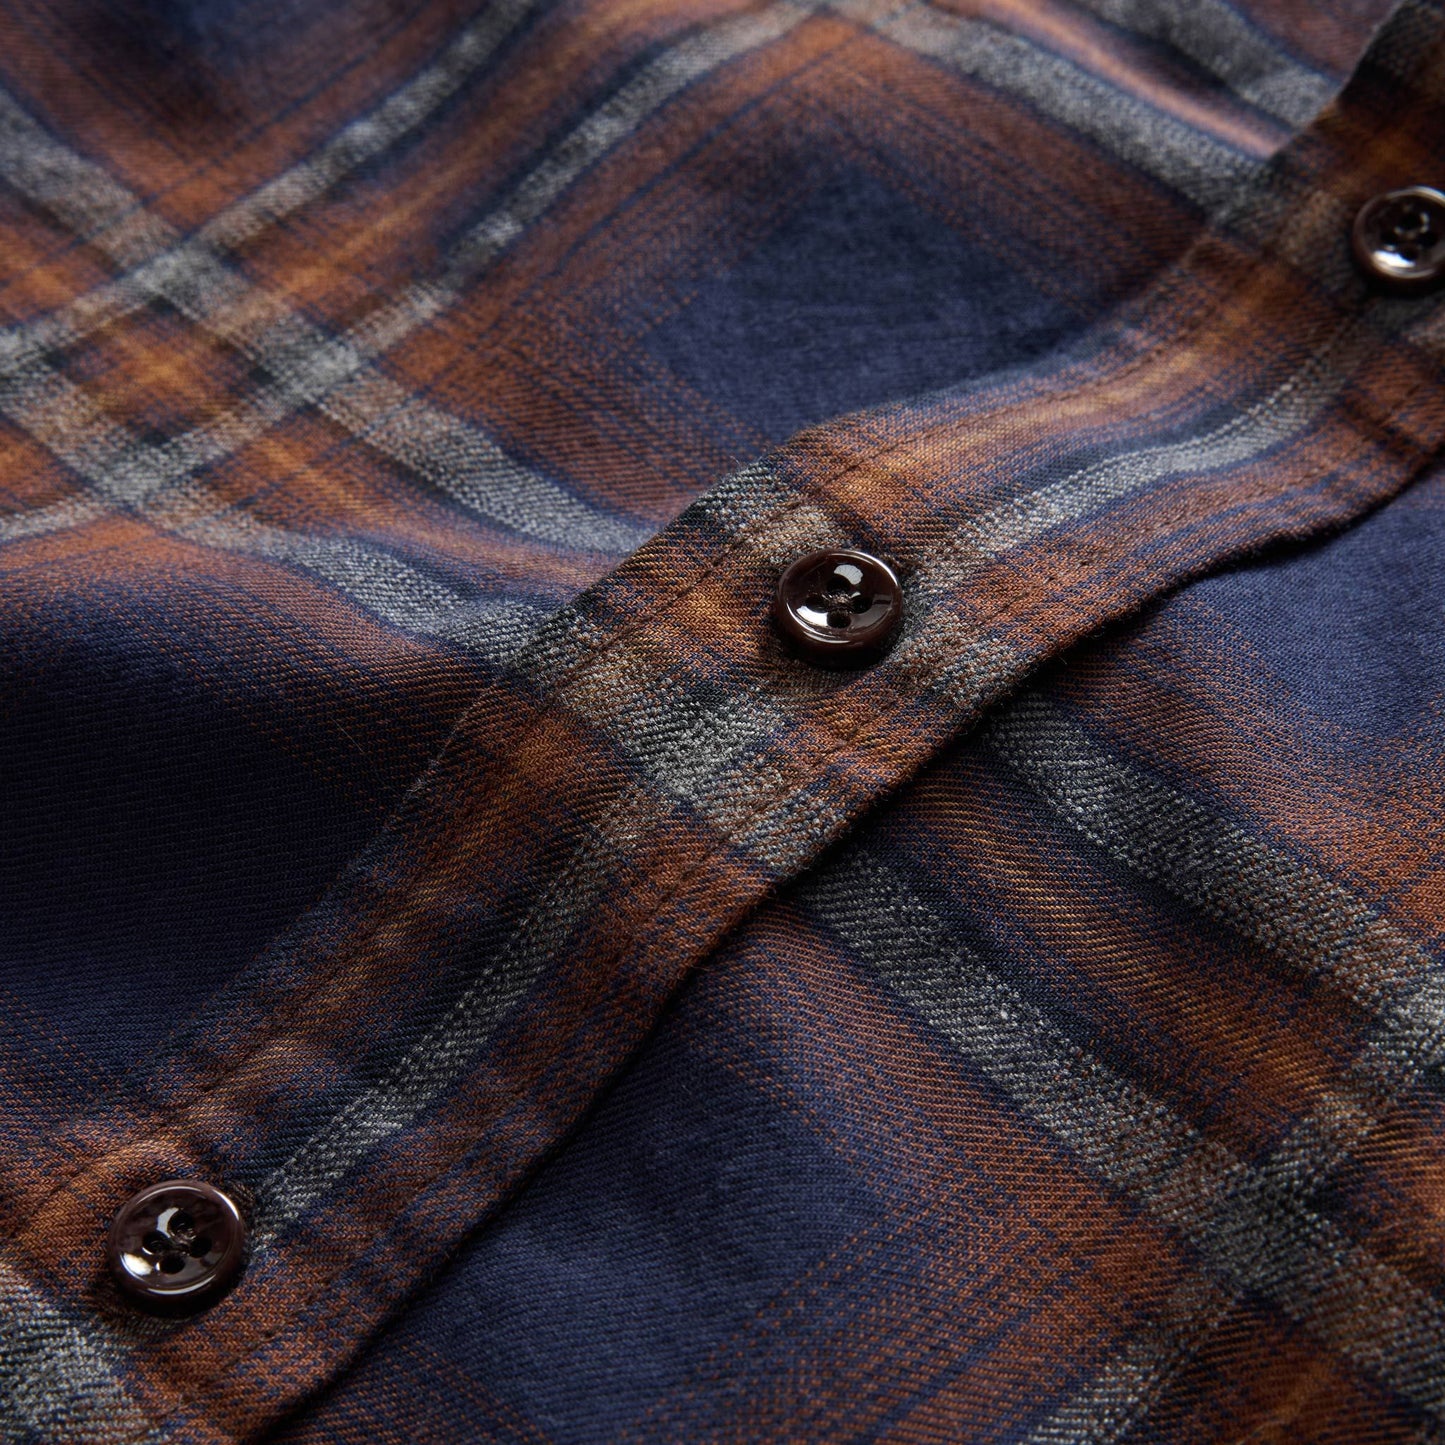 The California in Twilight Plaid Brushed Cotton Twill